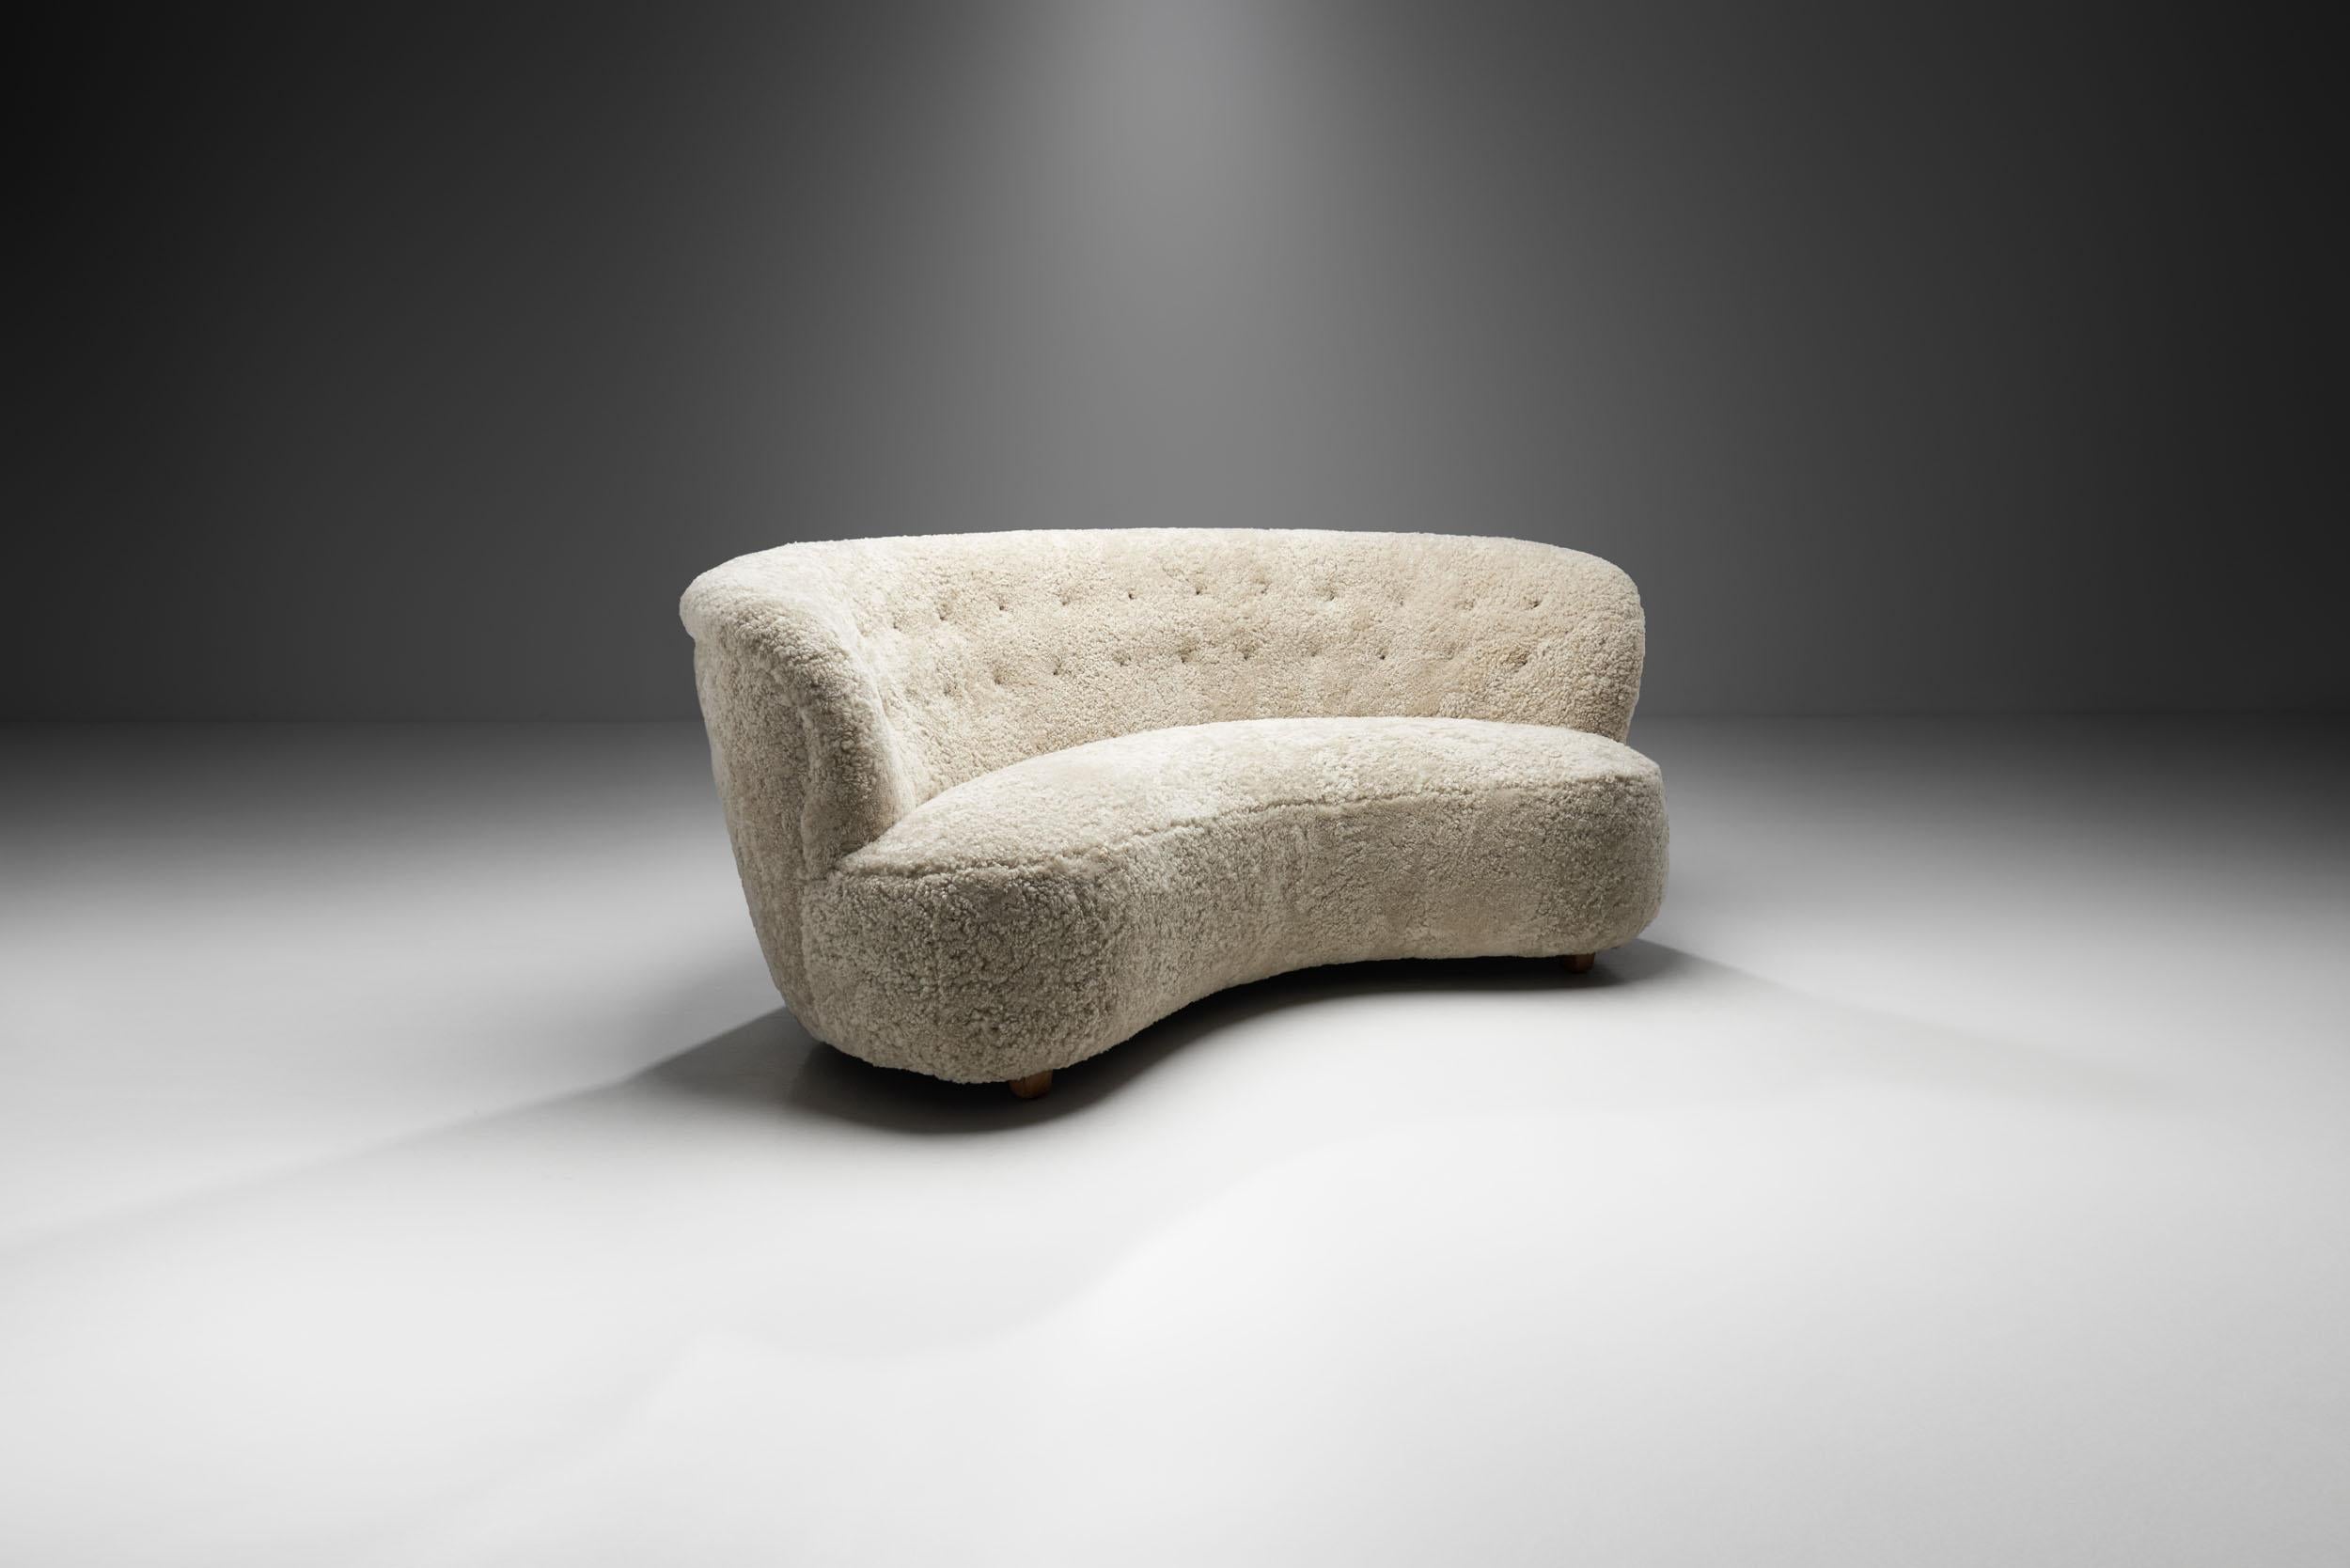 The curved, or banana sofa is often thought of as the most ubiquitous piece of furniture. While a sofa with a rounded shape is not ground-breaking, it has typically been reserved for people who could afford to choose an artistic style over a